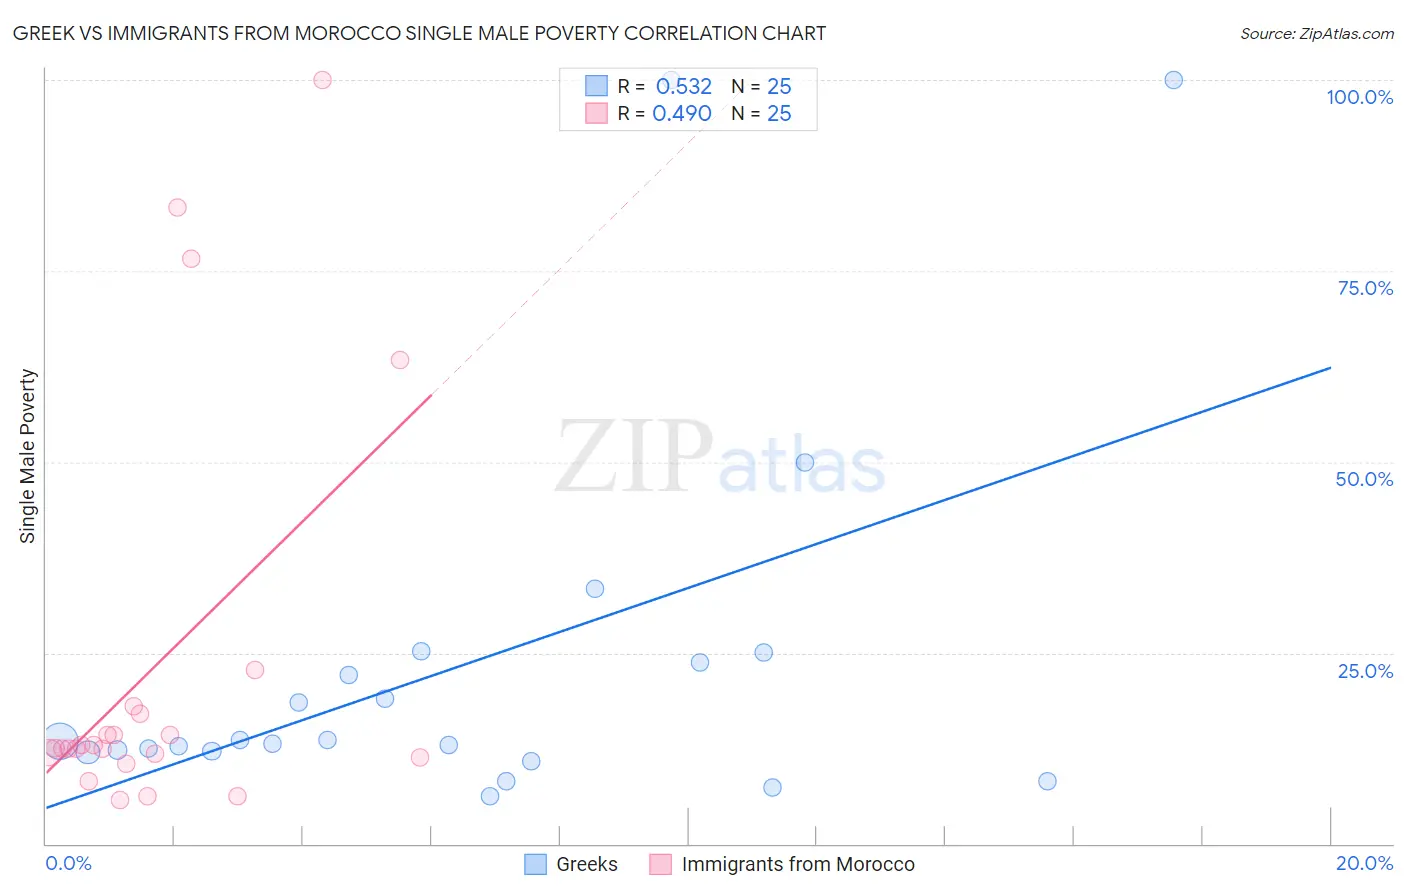 Greek vs Immigrants from Morocco Single Male Poverty